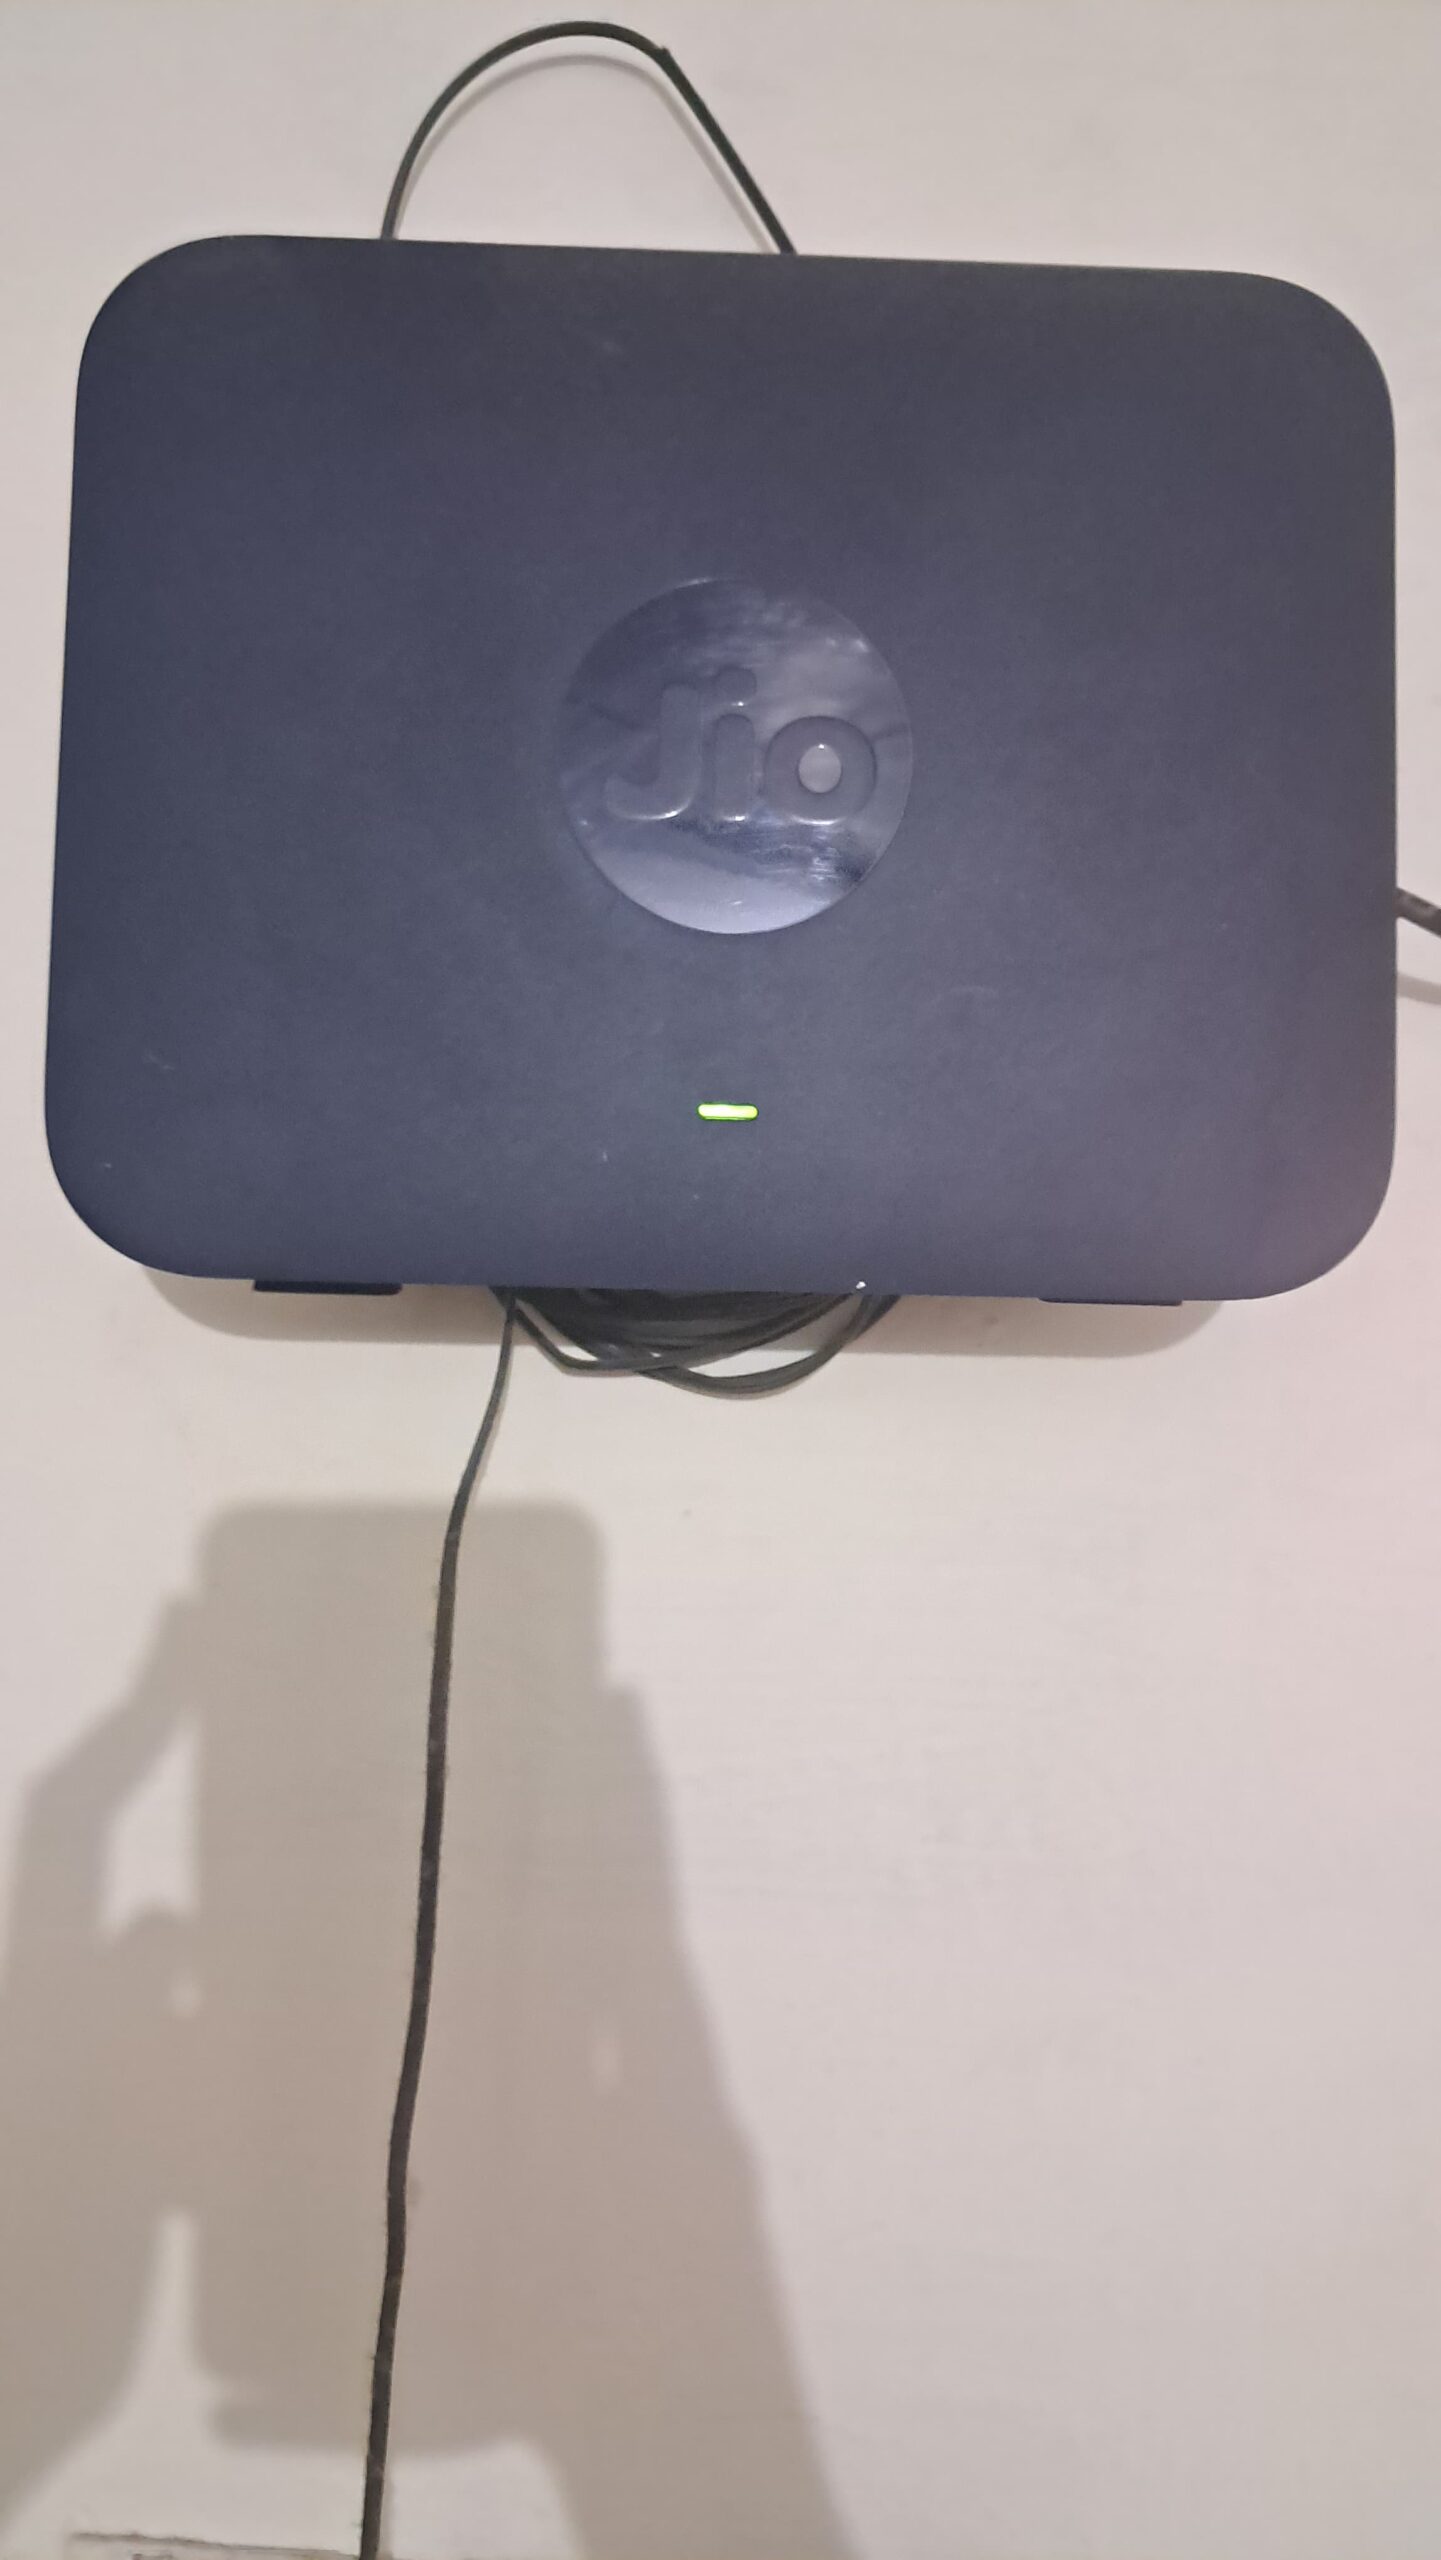 image of my jio  fiber router with green light